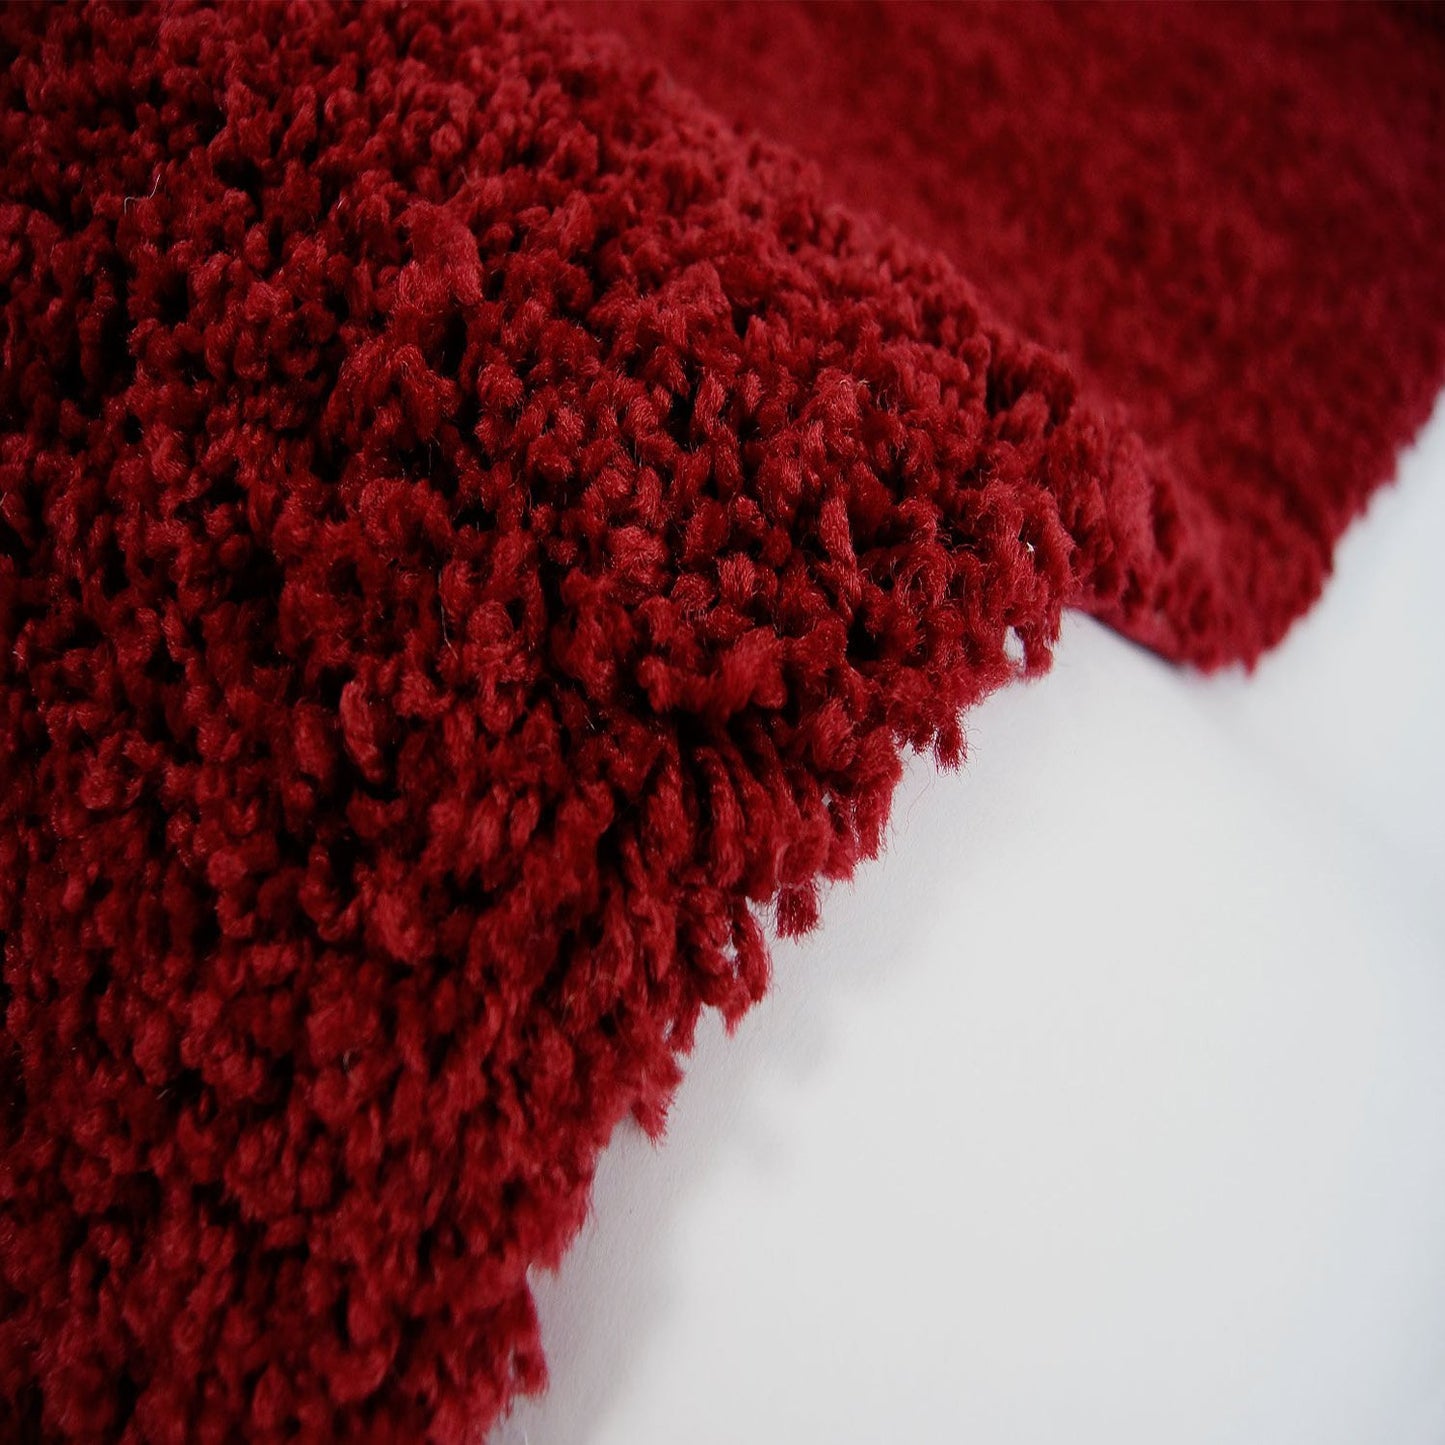 Shaggy Red Area Rug - 